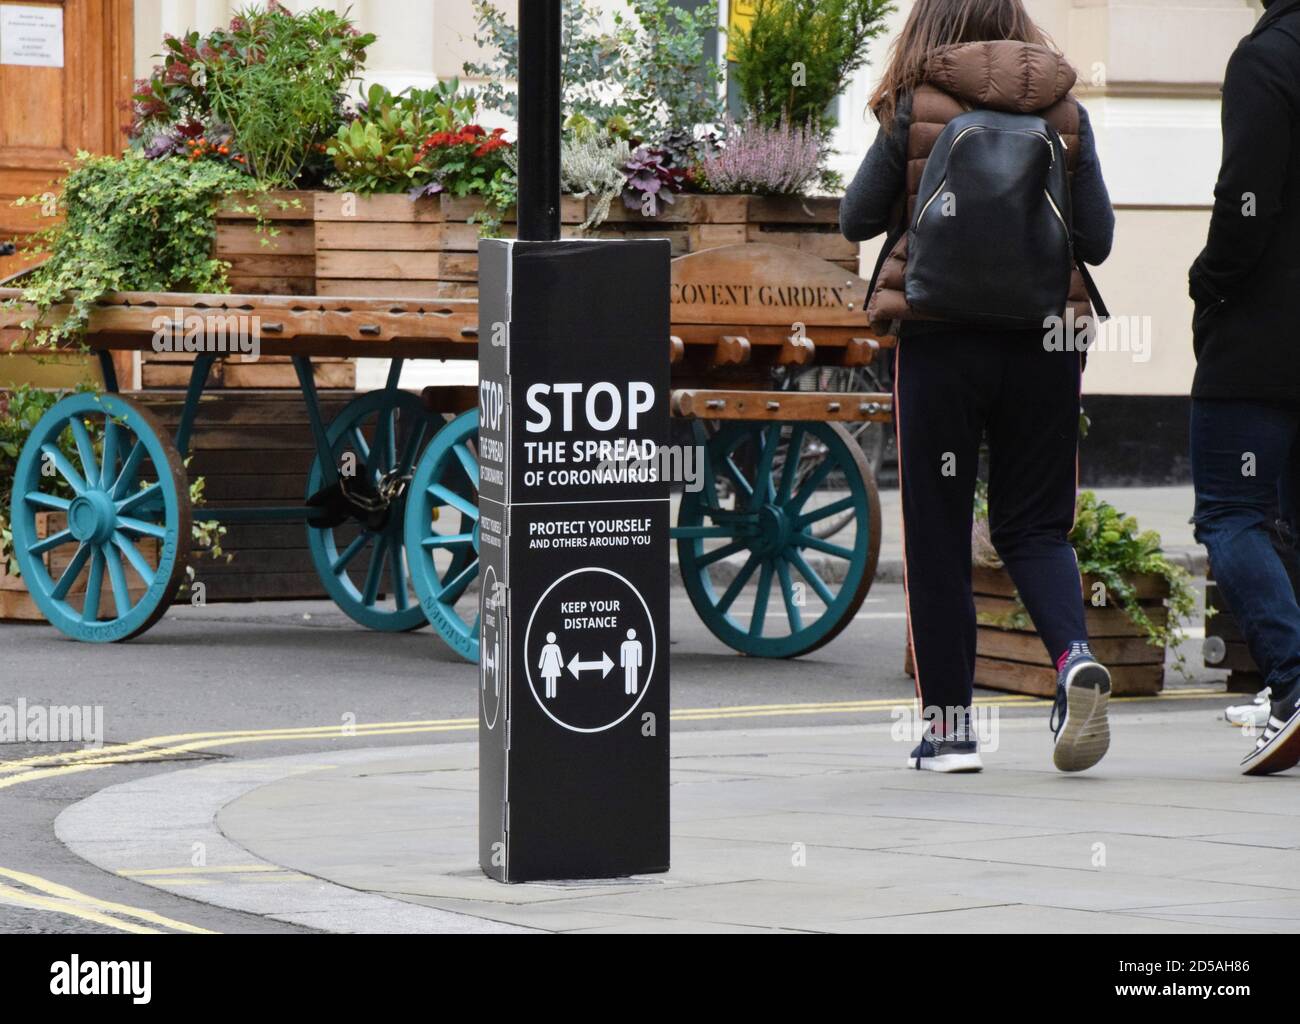 People walk past a Stop The Spread Of Coronavirus social distancing street sign in Covent Garden, London Stock Photo